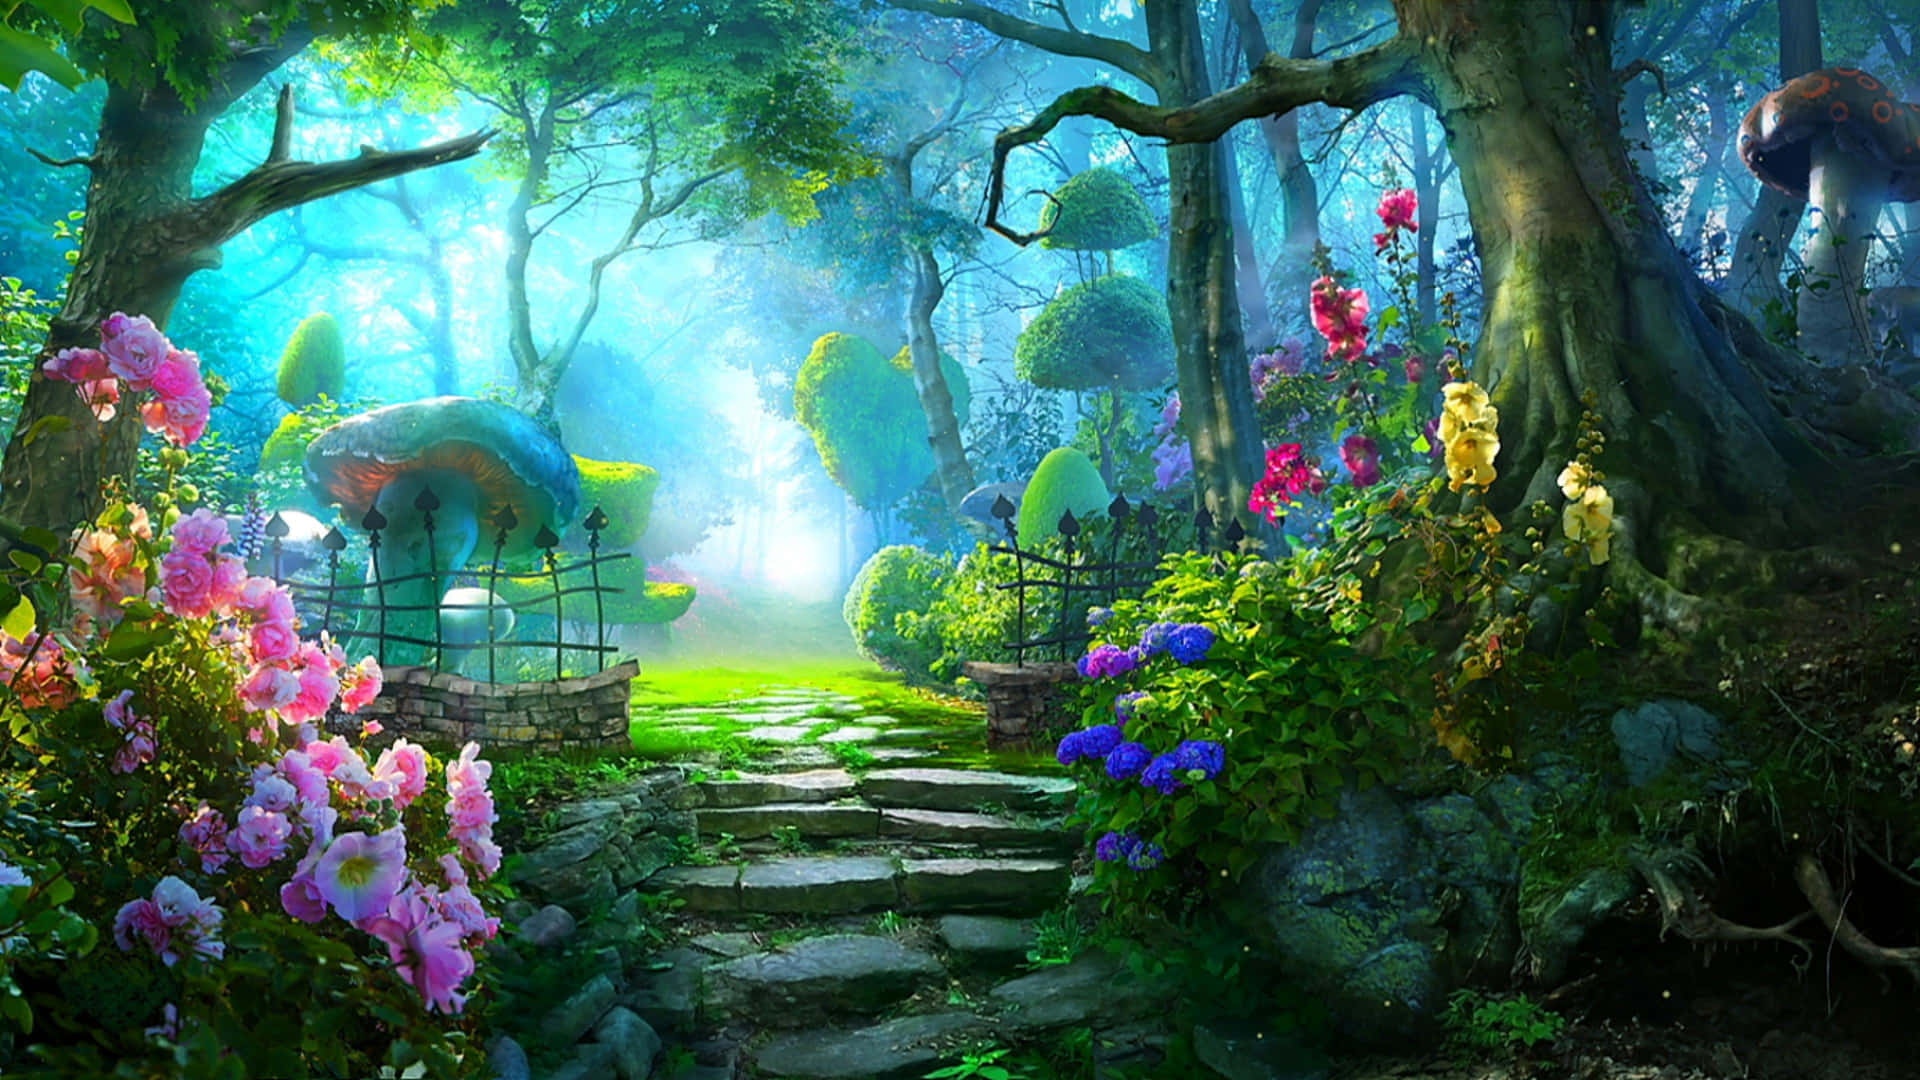 Feel the mystical beauty of the Fairy Forest Wallpaper